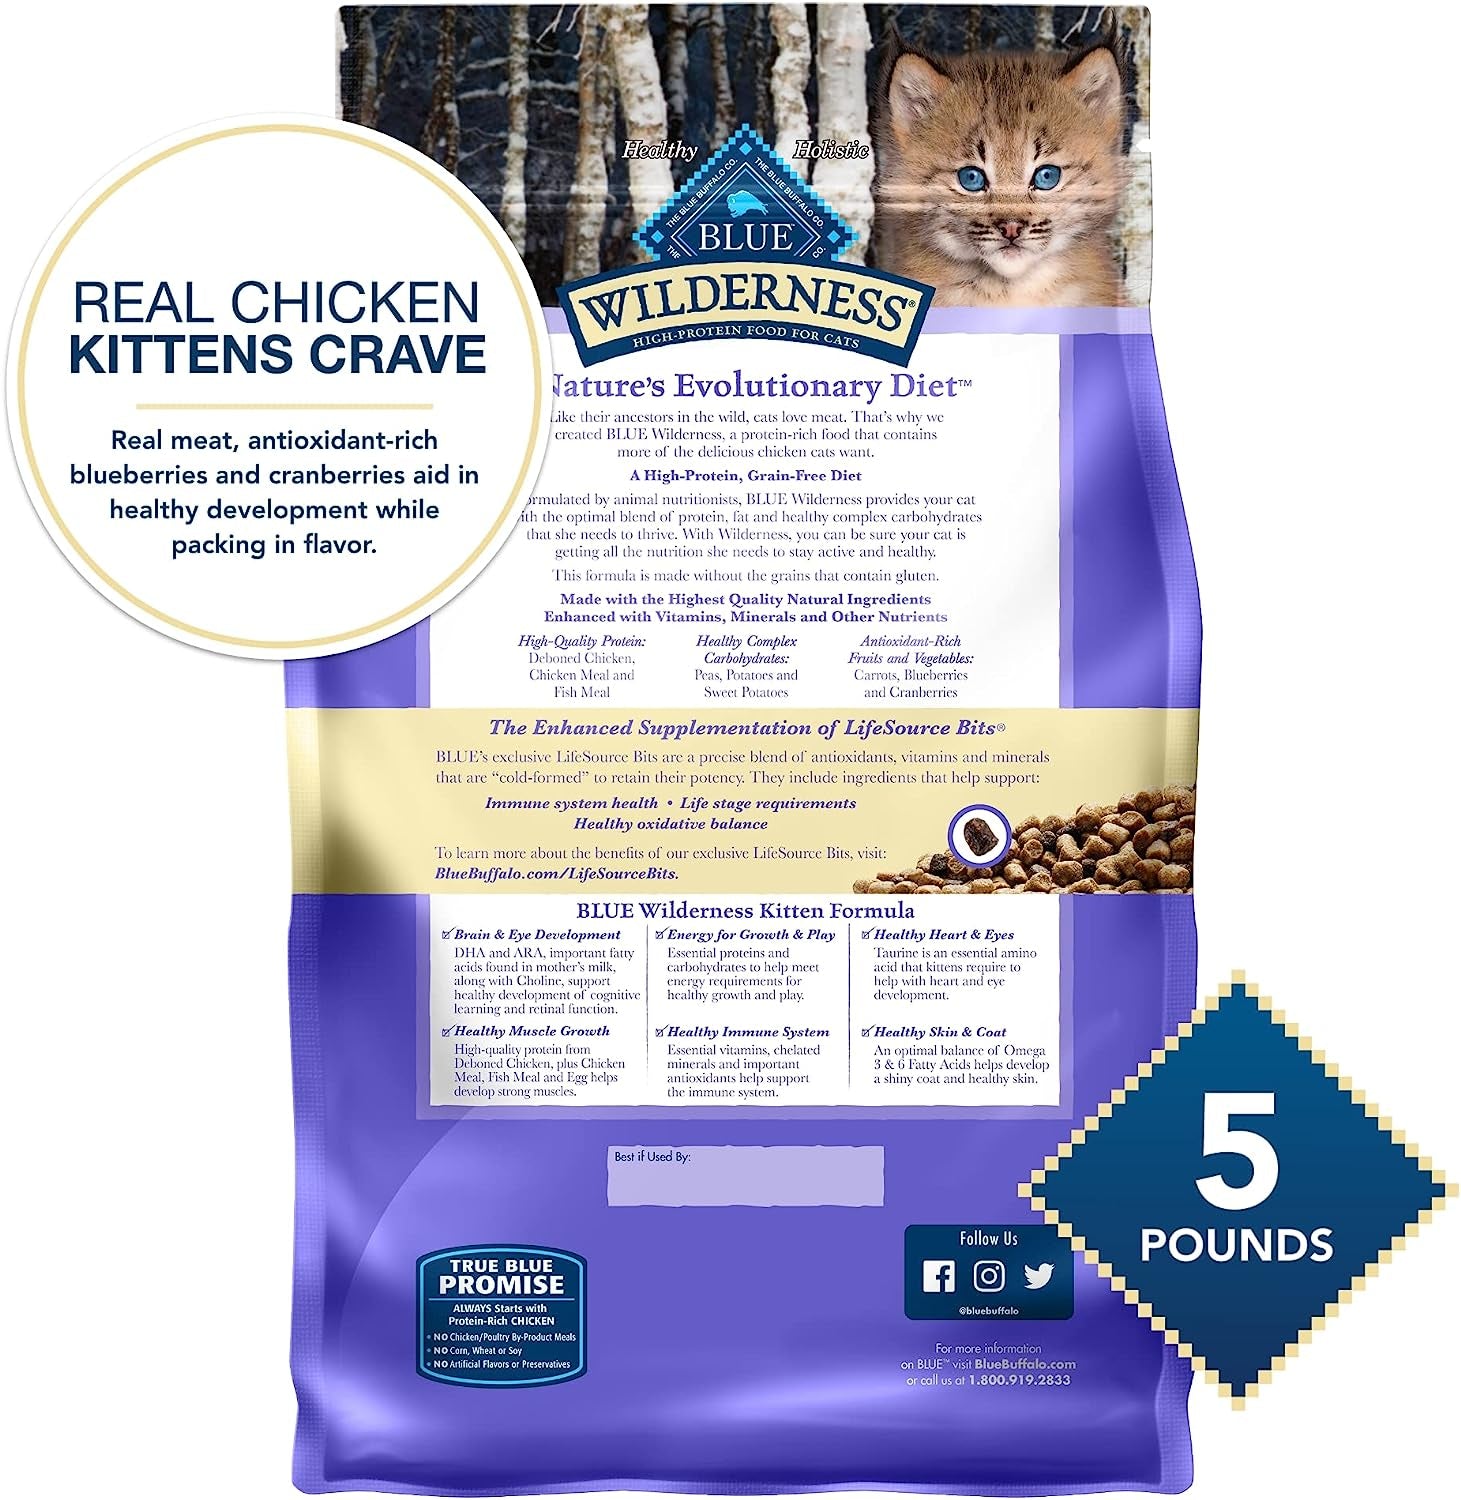 Blue Buffalo Cat Food for Kittens, Natural Chicken Recipe, High Protein, Dry Cat Food, 5 Lb Bag